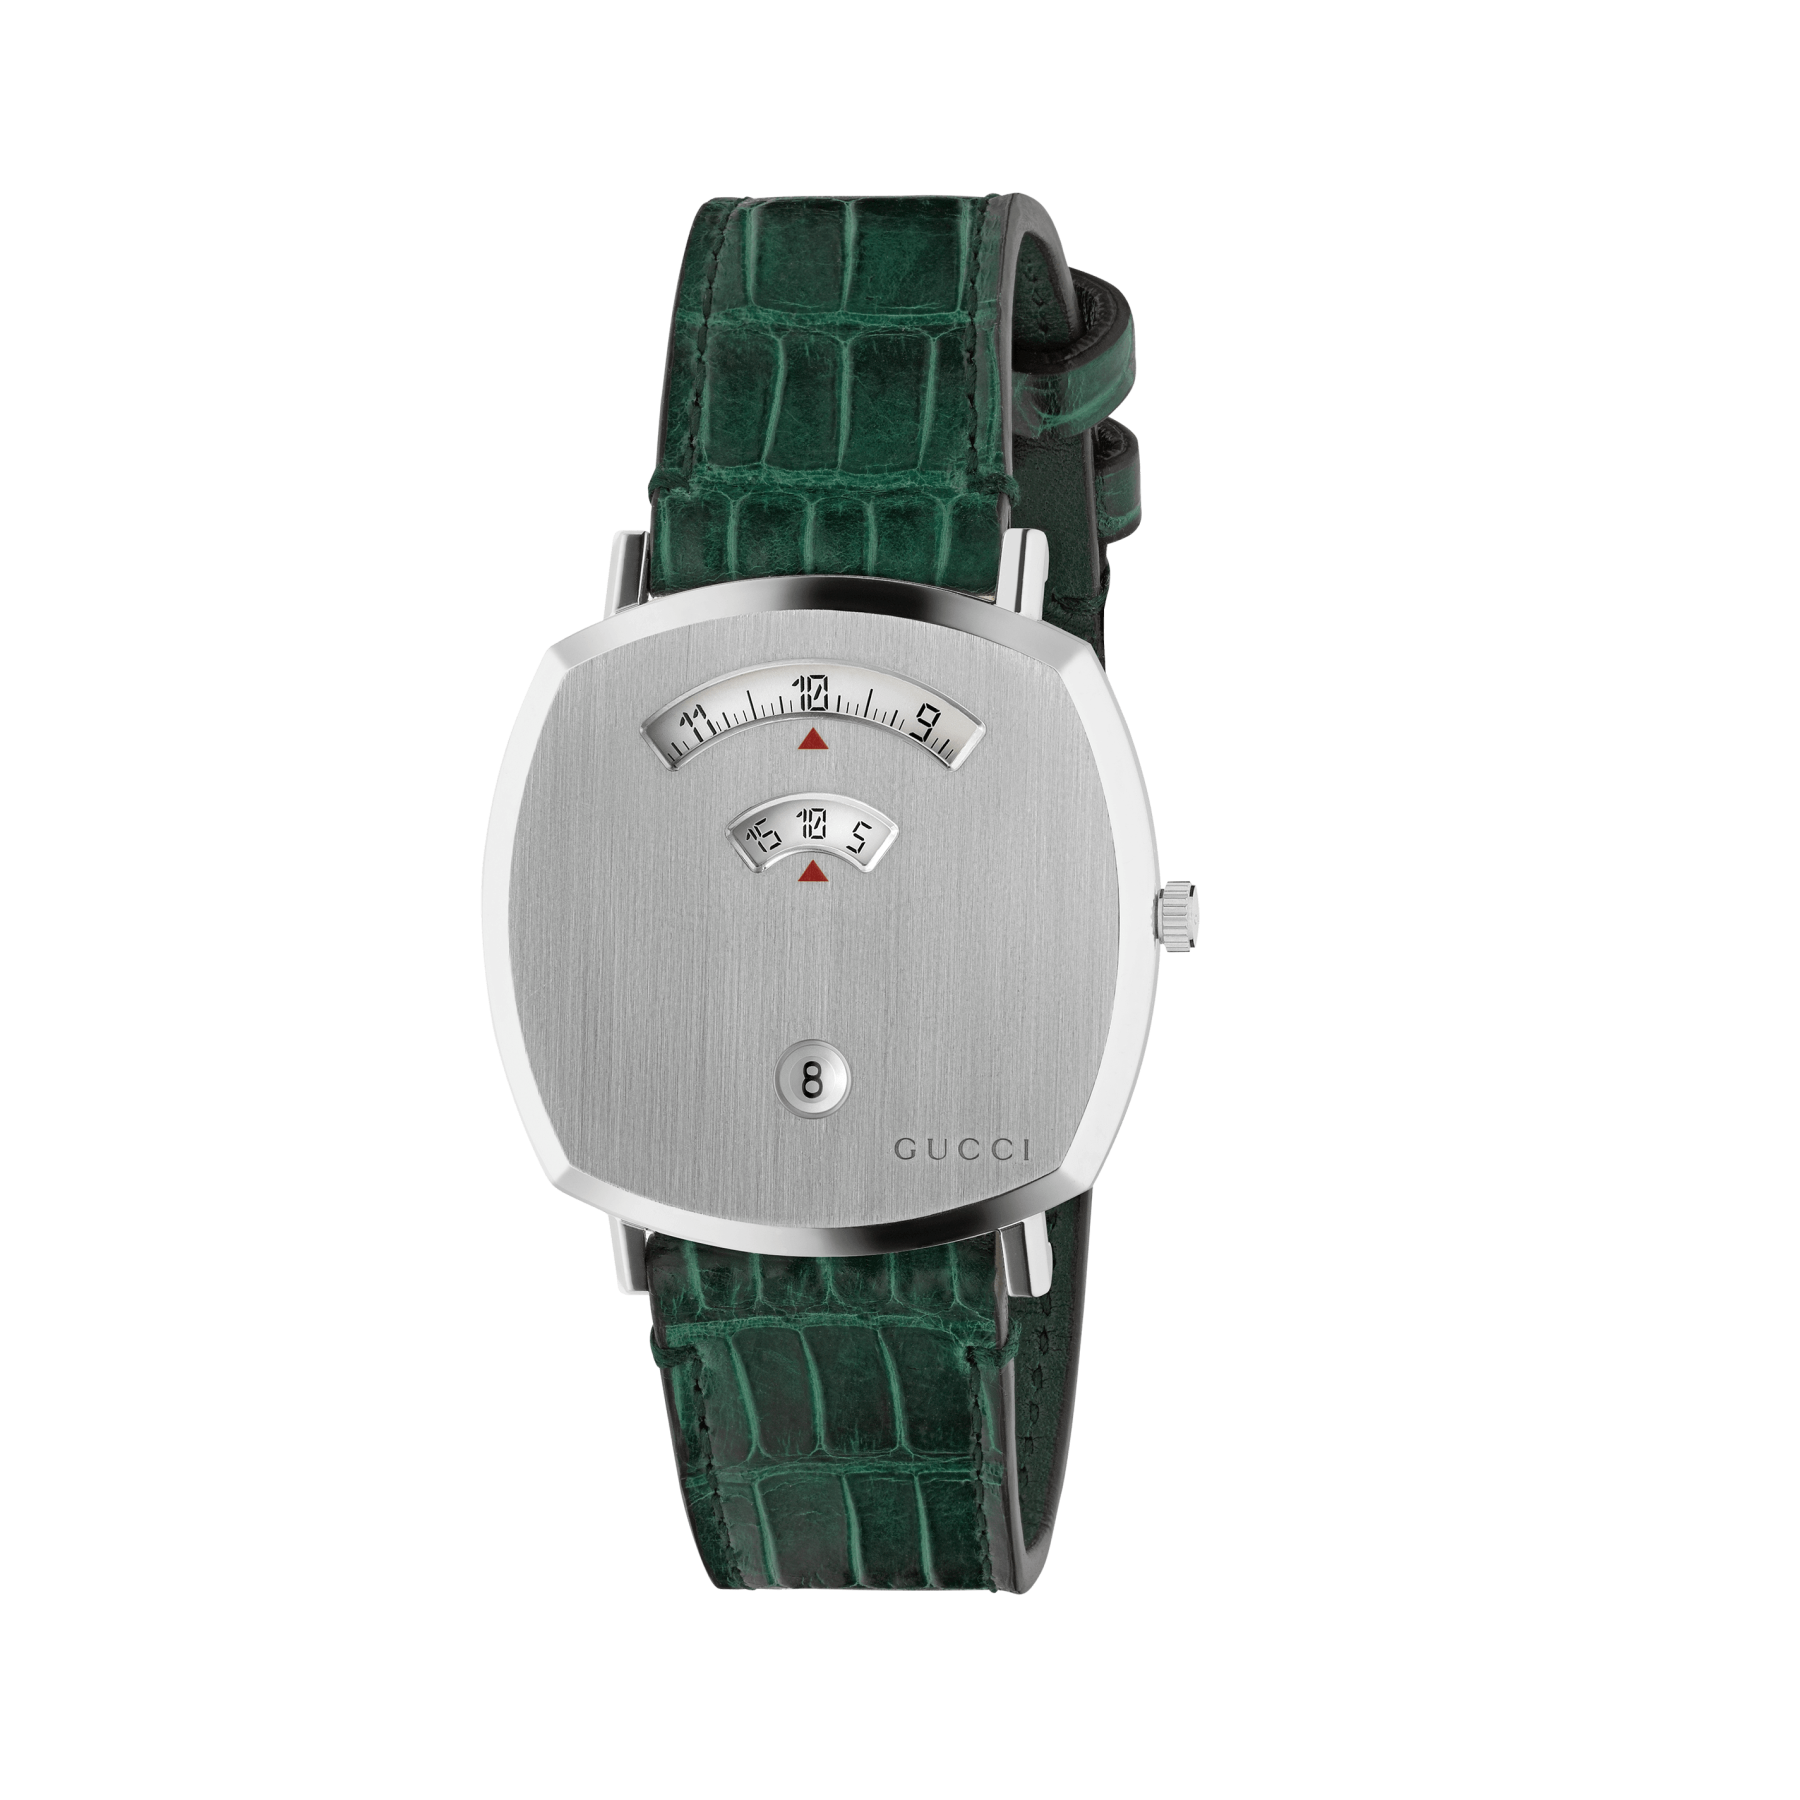 Gucci Grip 38mm Steel and Green Alligator Watch front view